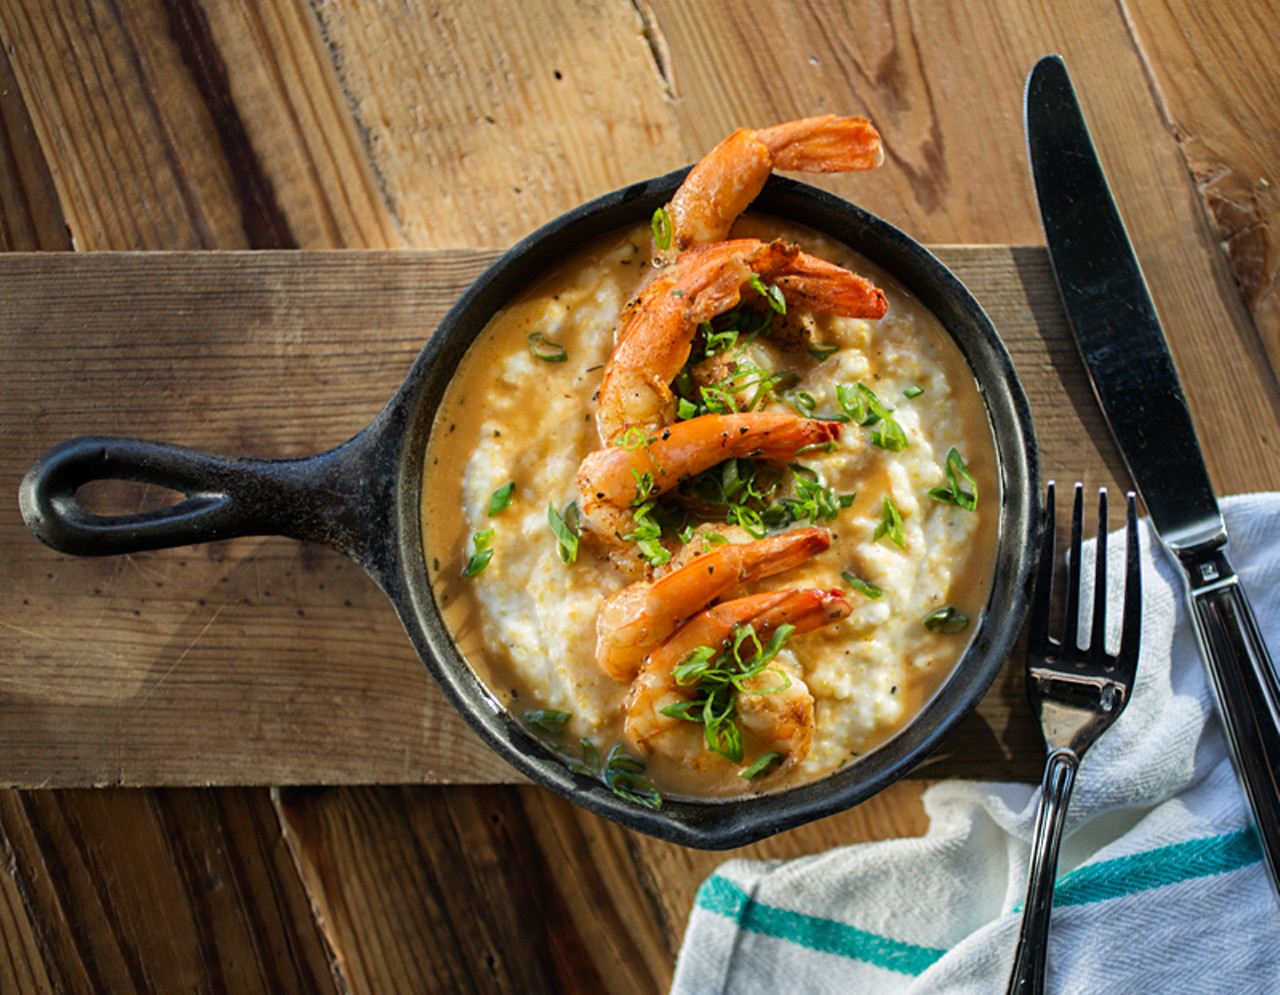 The shrimp and grits entree.